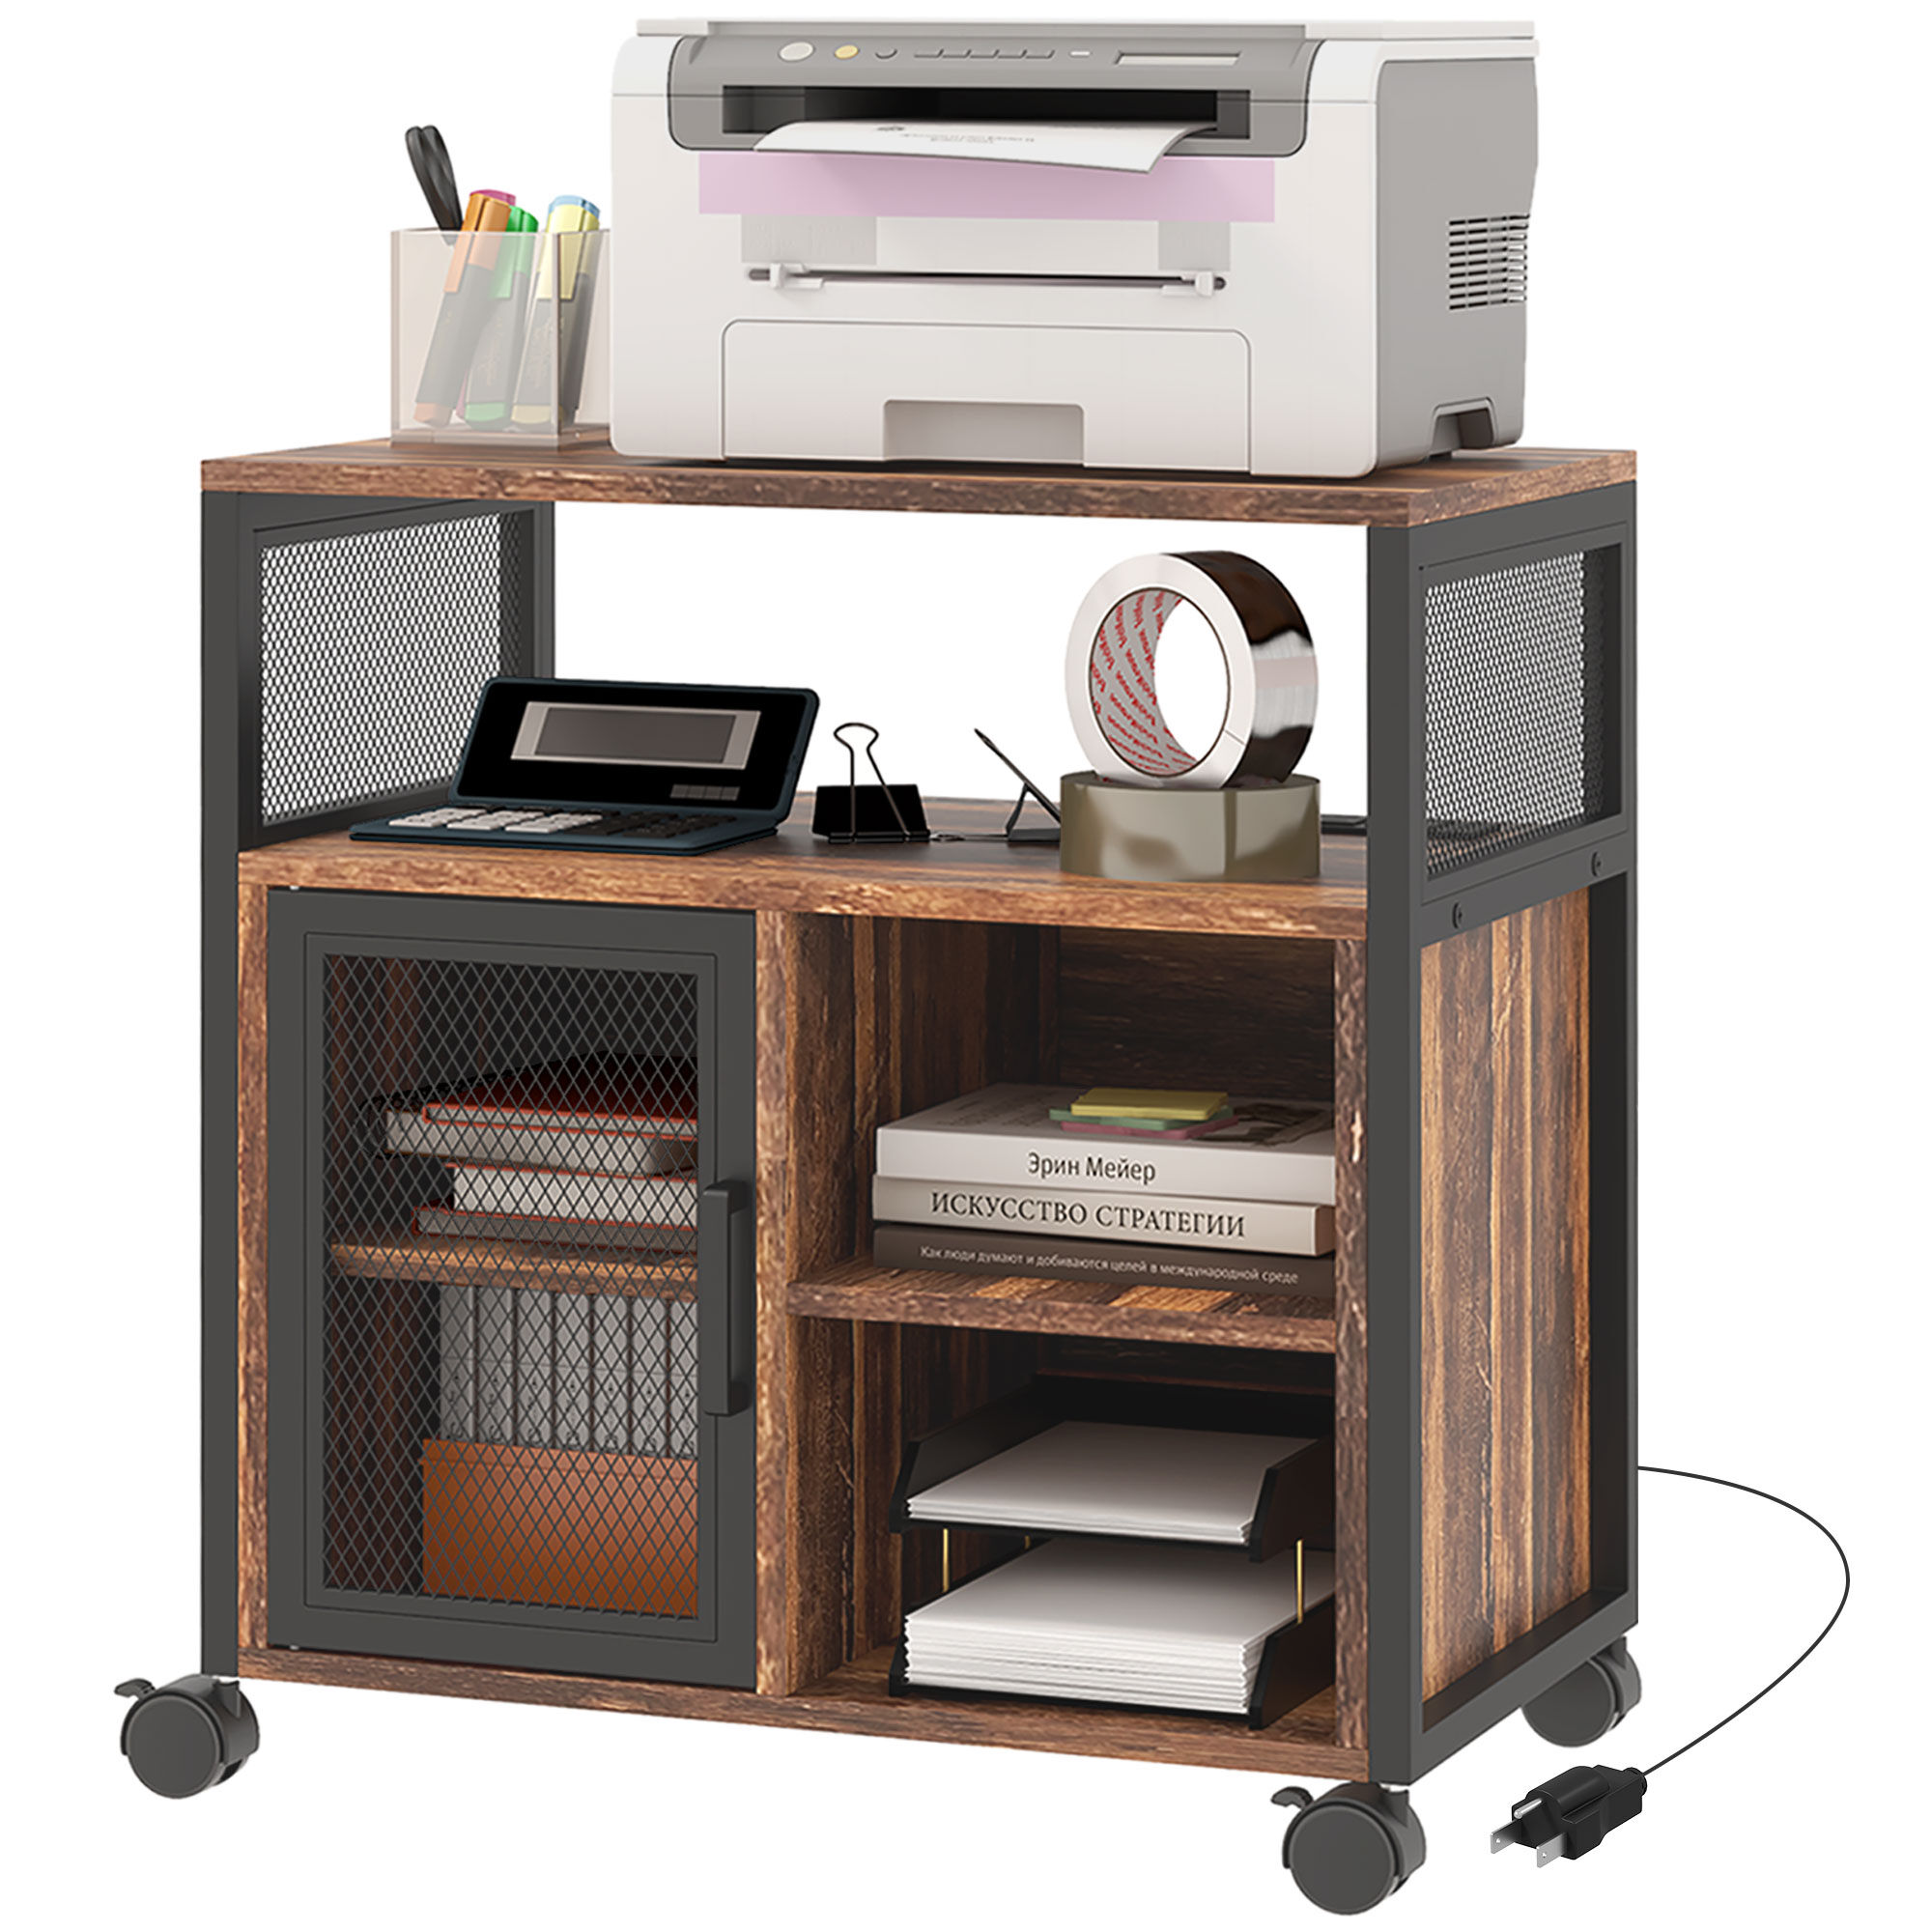 Vinsetto Industrial Mobile Printer Stand Rustic Brown with Socket USB Charging Ports Storage and Wheels   Aosom.com